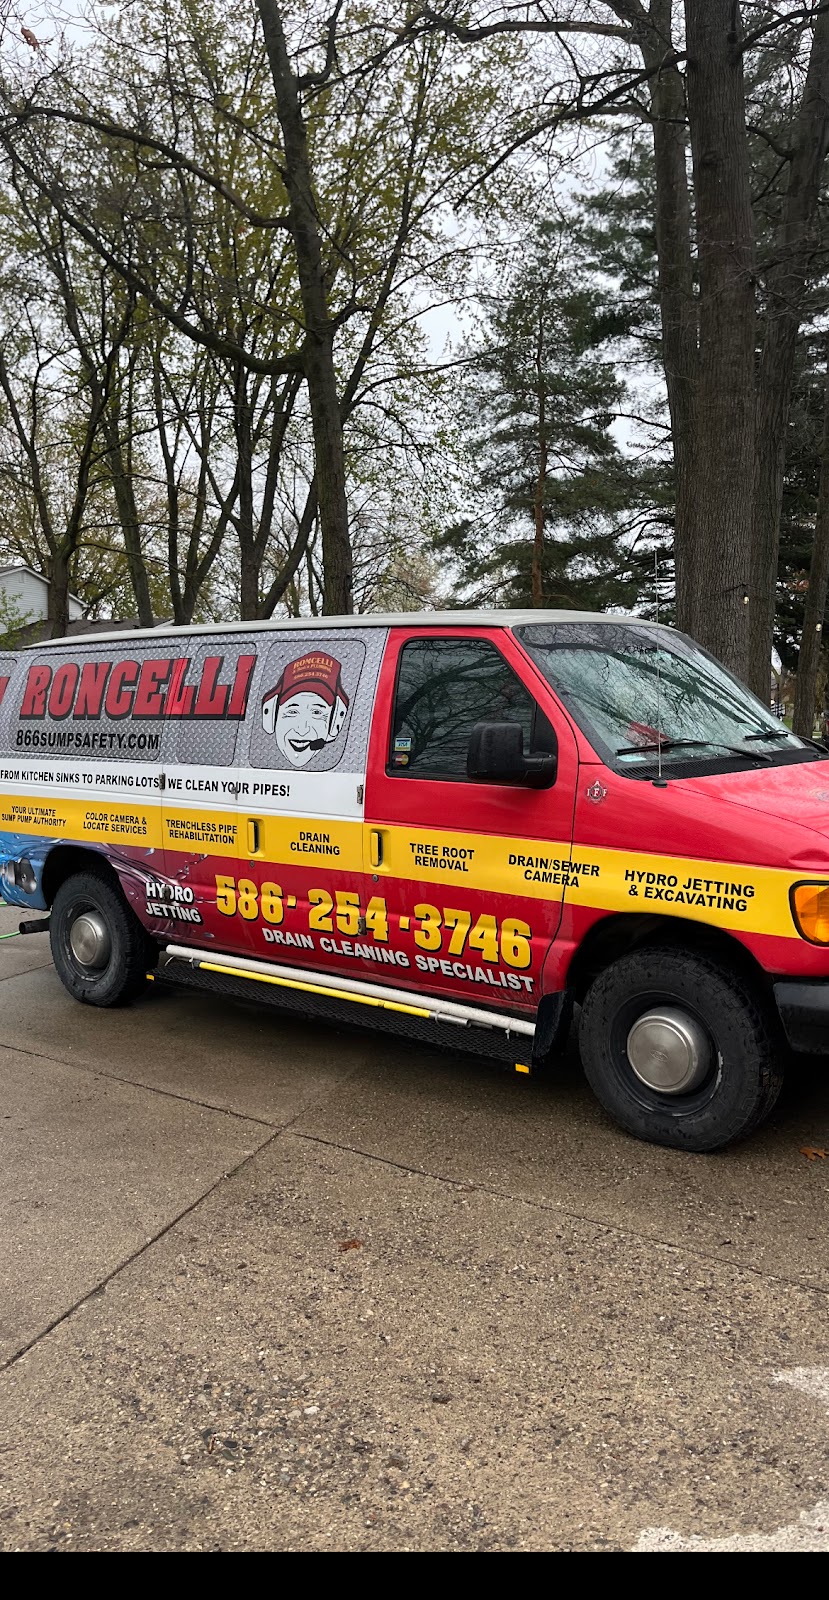 Roncelli & Sons Plumbing | 70580 Campground Rd, Bruce Township, MI 48065, USA | Phone: (586) 254-3746